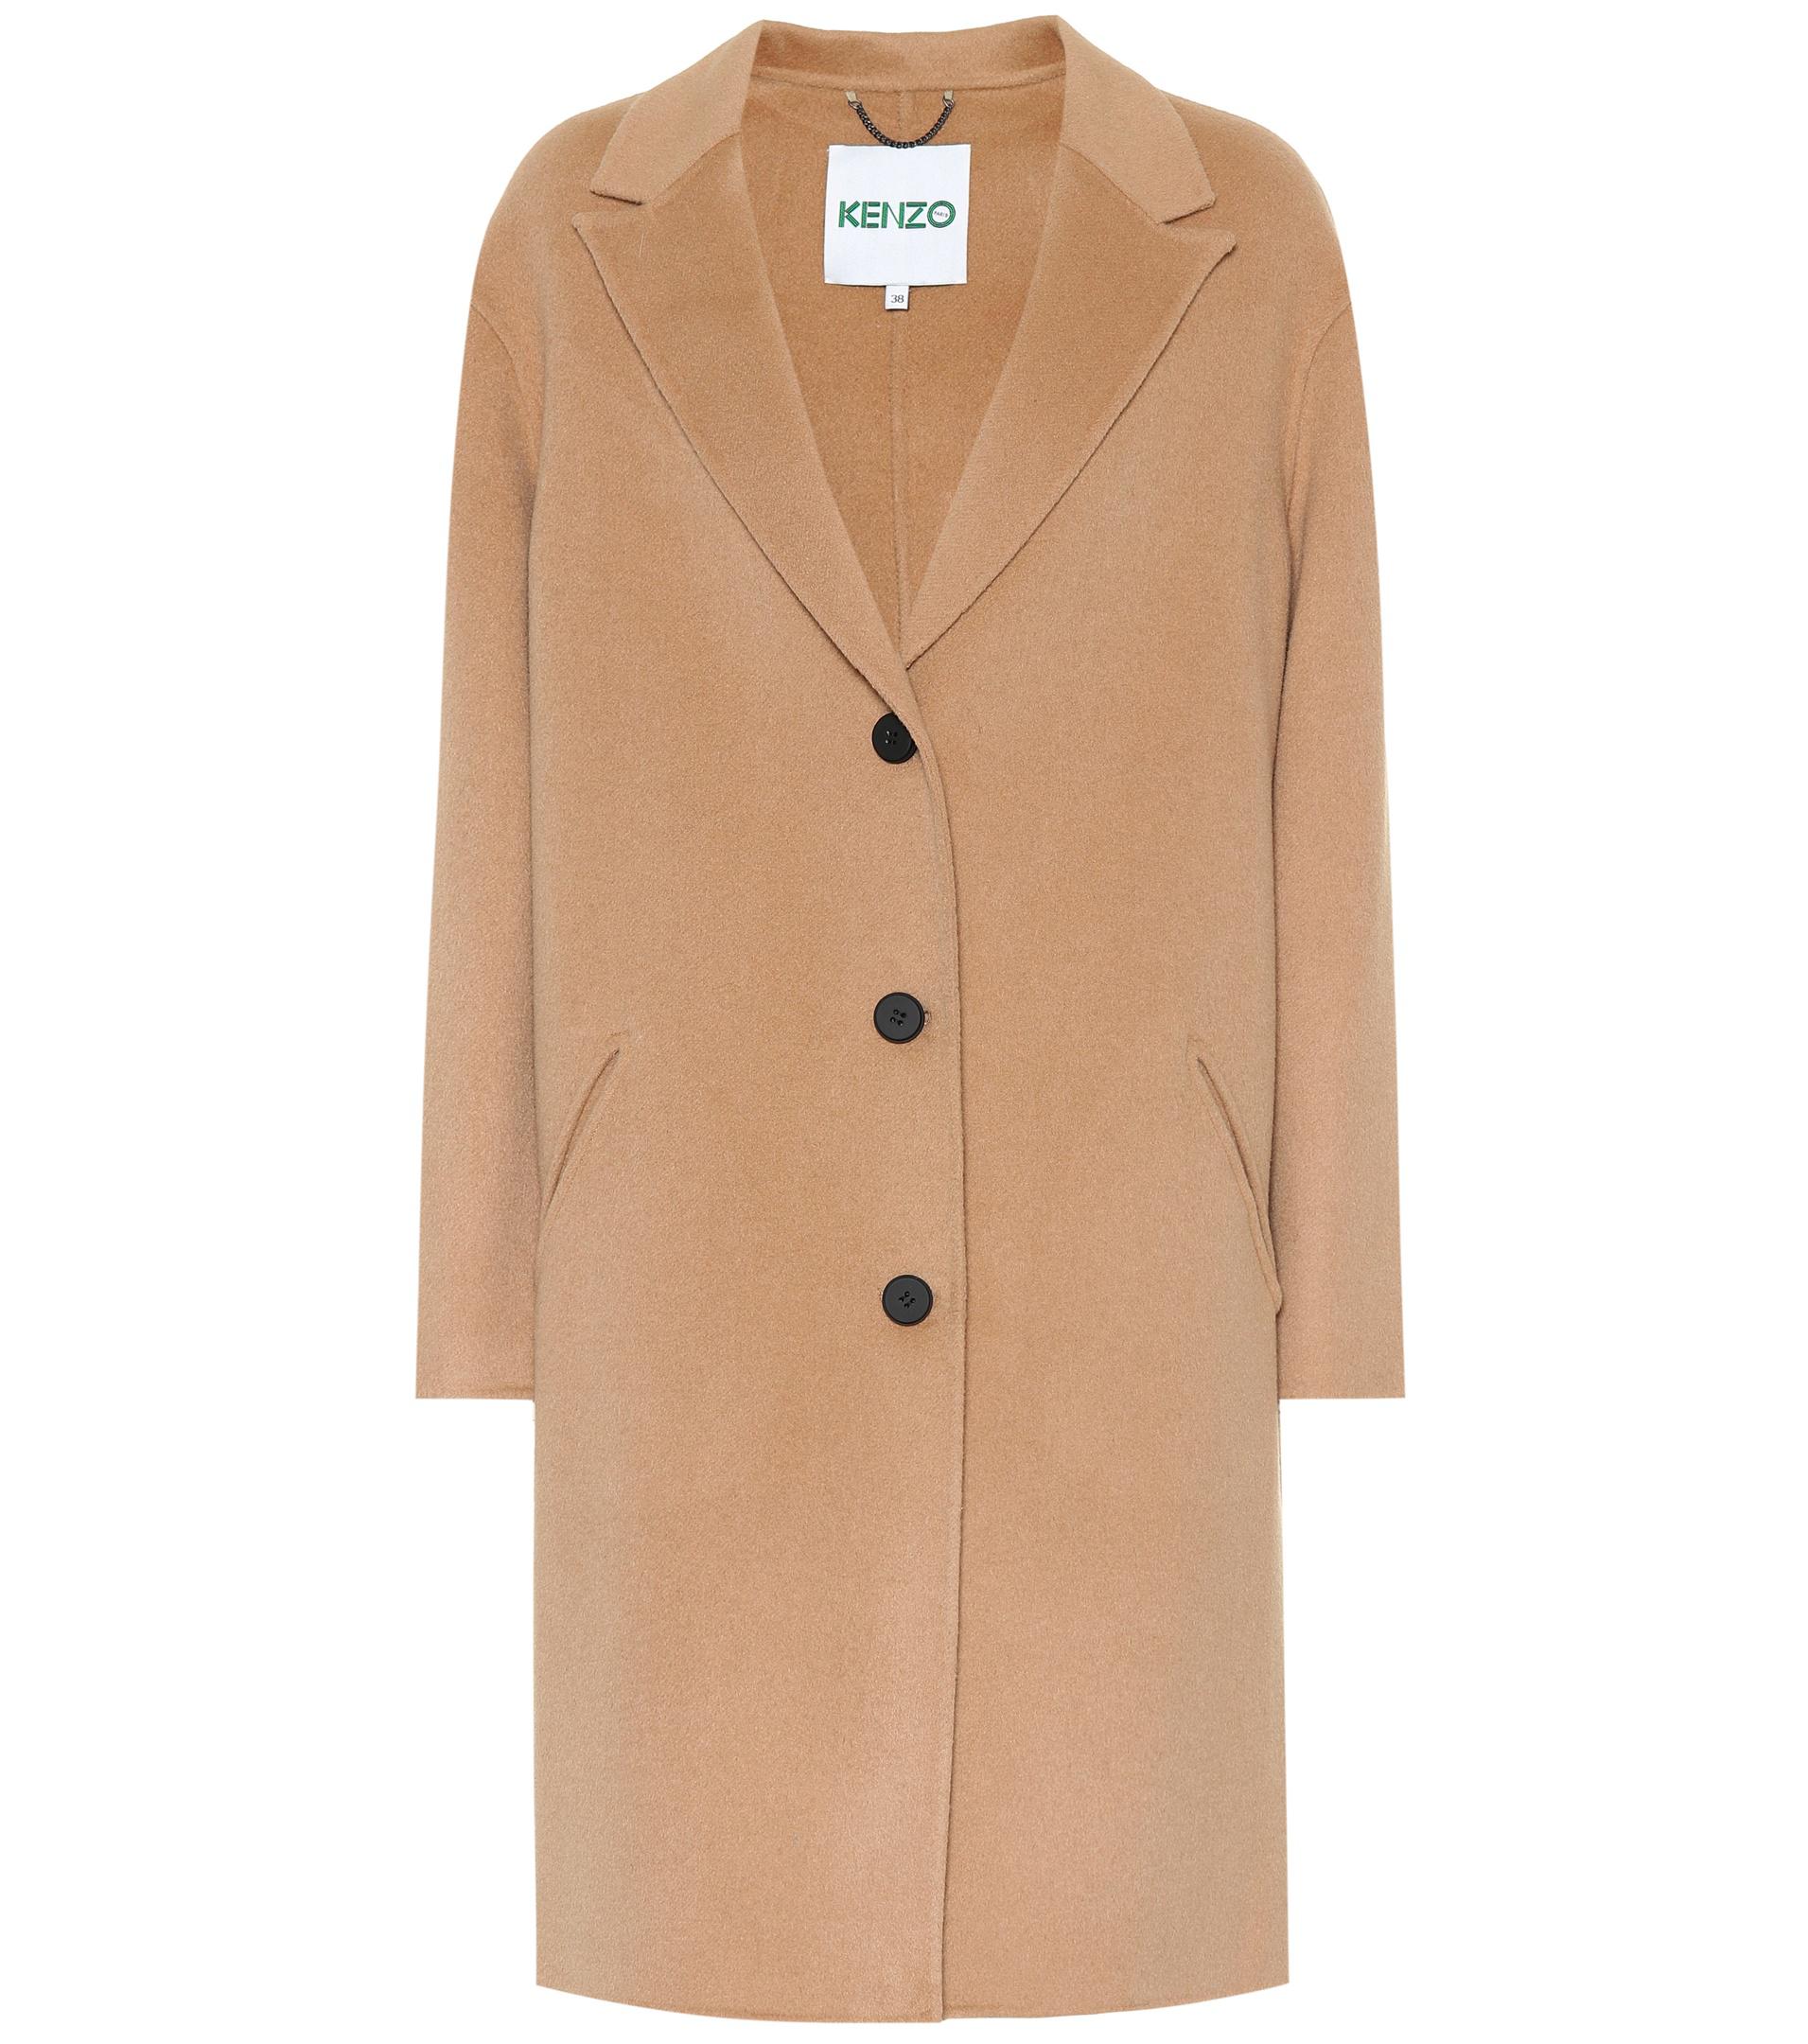 KENZO Cashmere Wool Coat in Beige (Natural) - Lyst